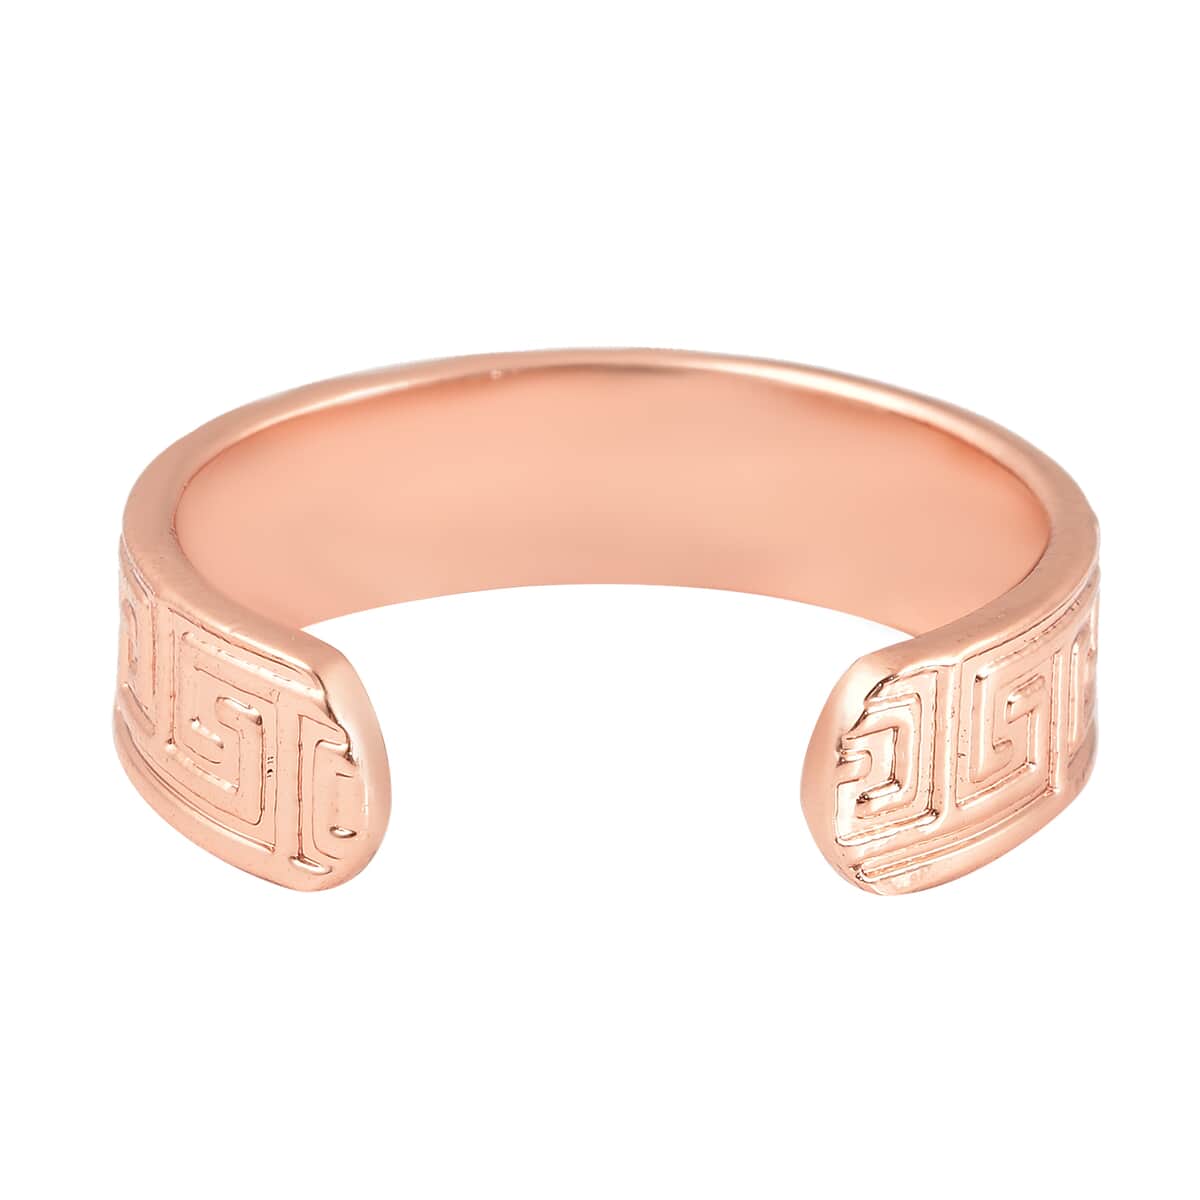 Magnetic By Design Greek Key Pattern Open Shank Ring in Rosetone (Fits Sizes 6-8) image number 5